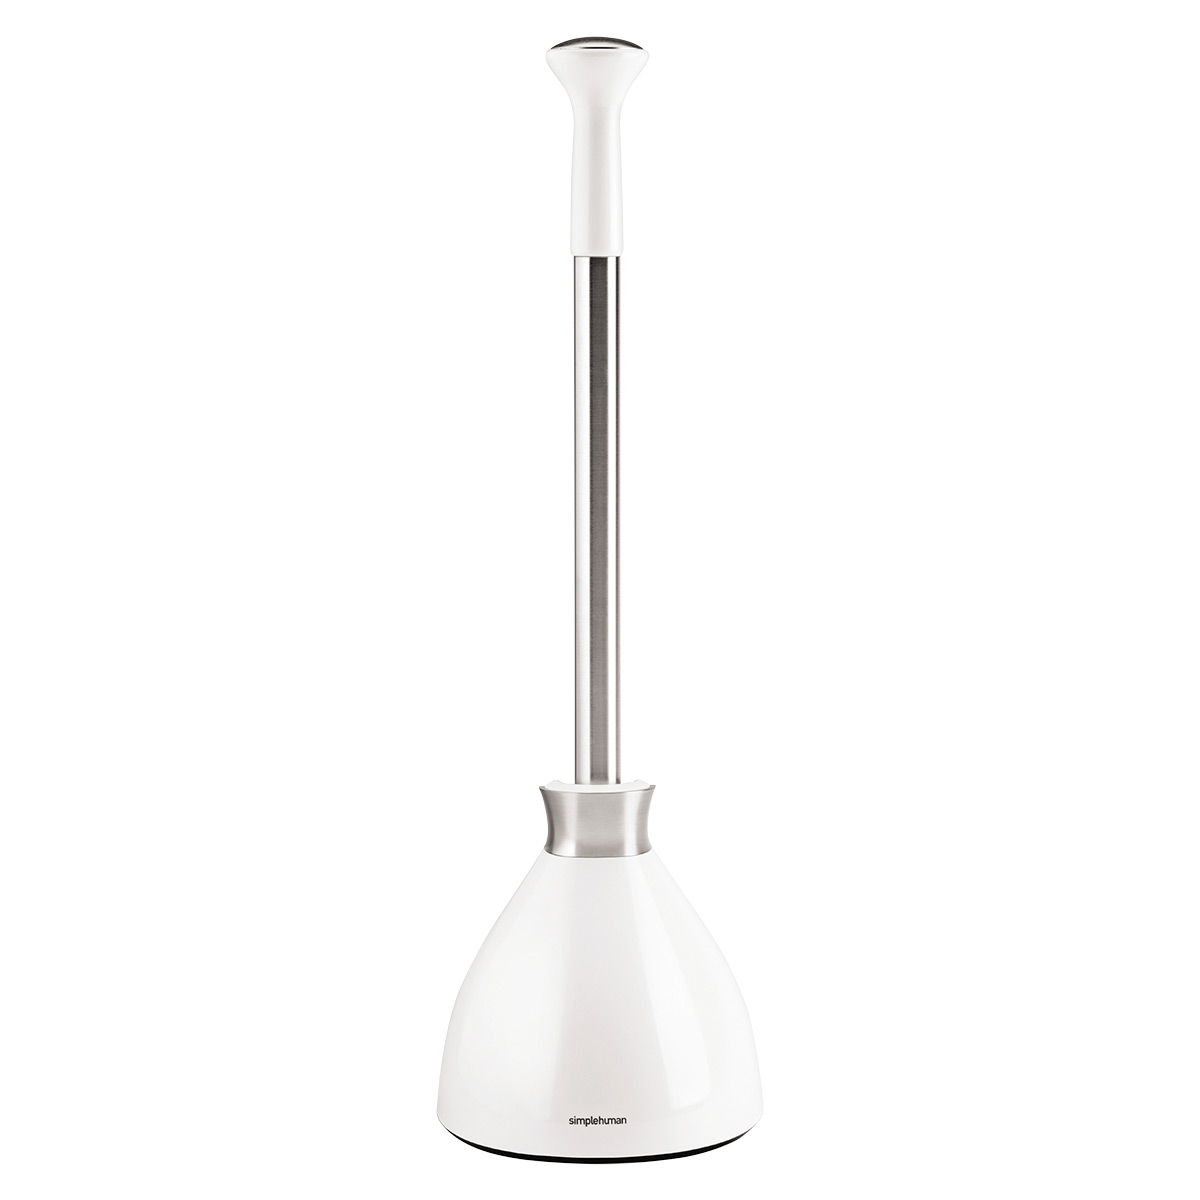 https://www.containerstore.com/catalogimages/393433/10082529-Simple-Human-Plunger-White-.jpg